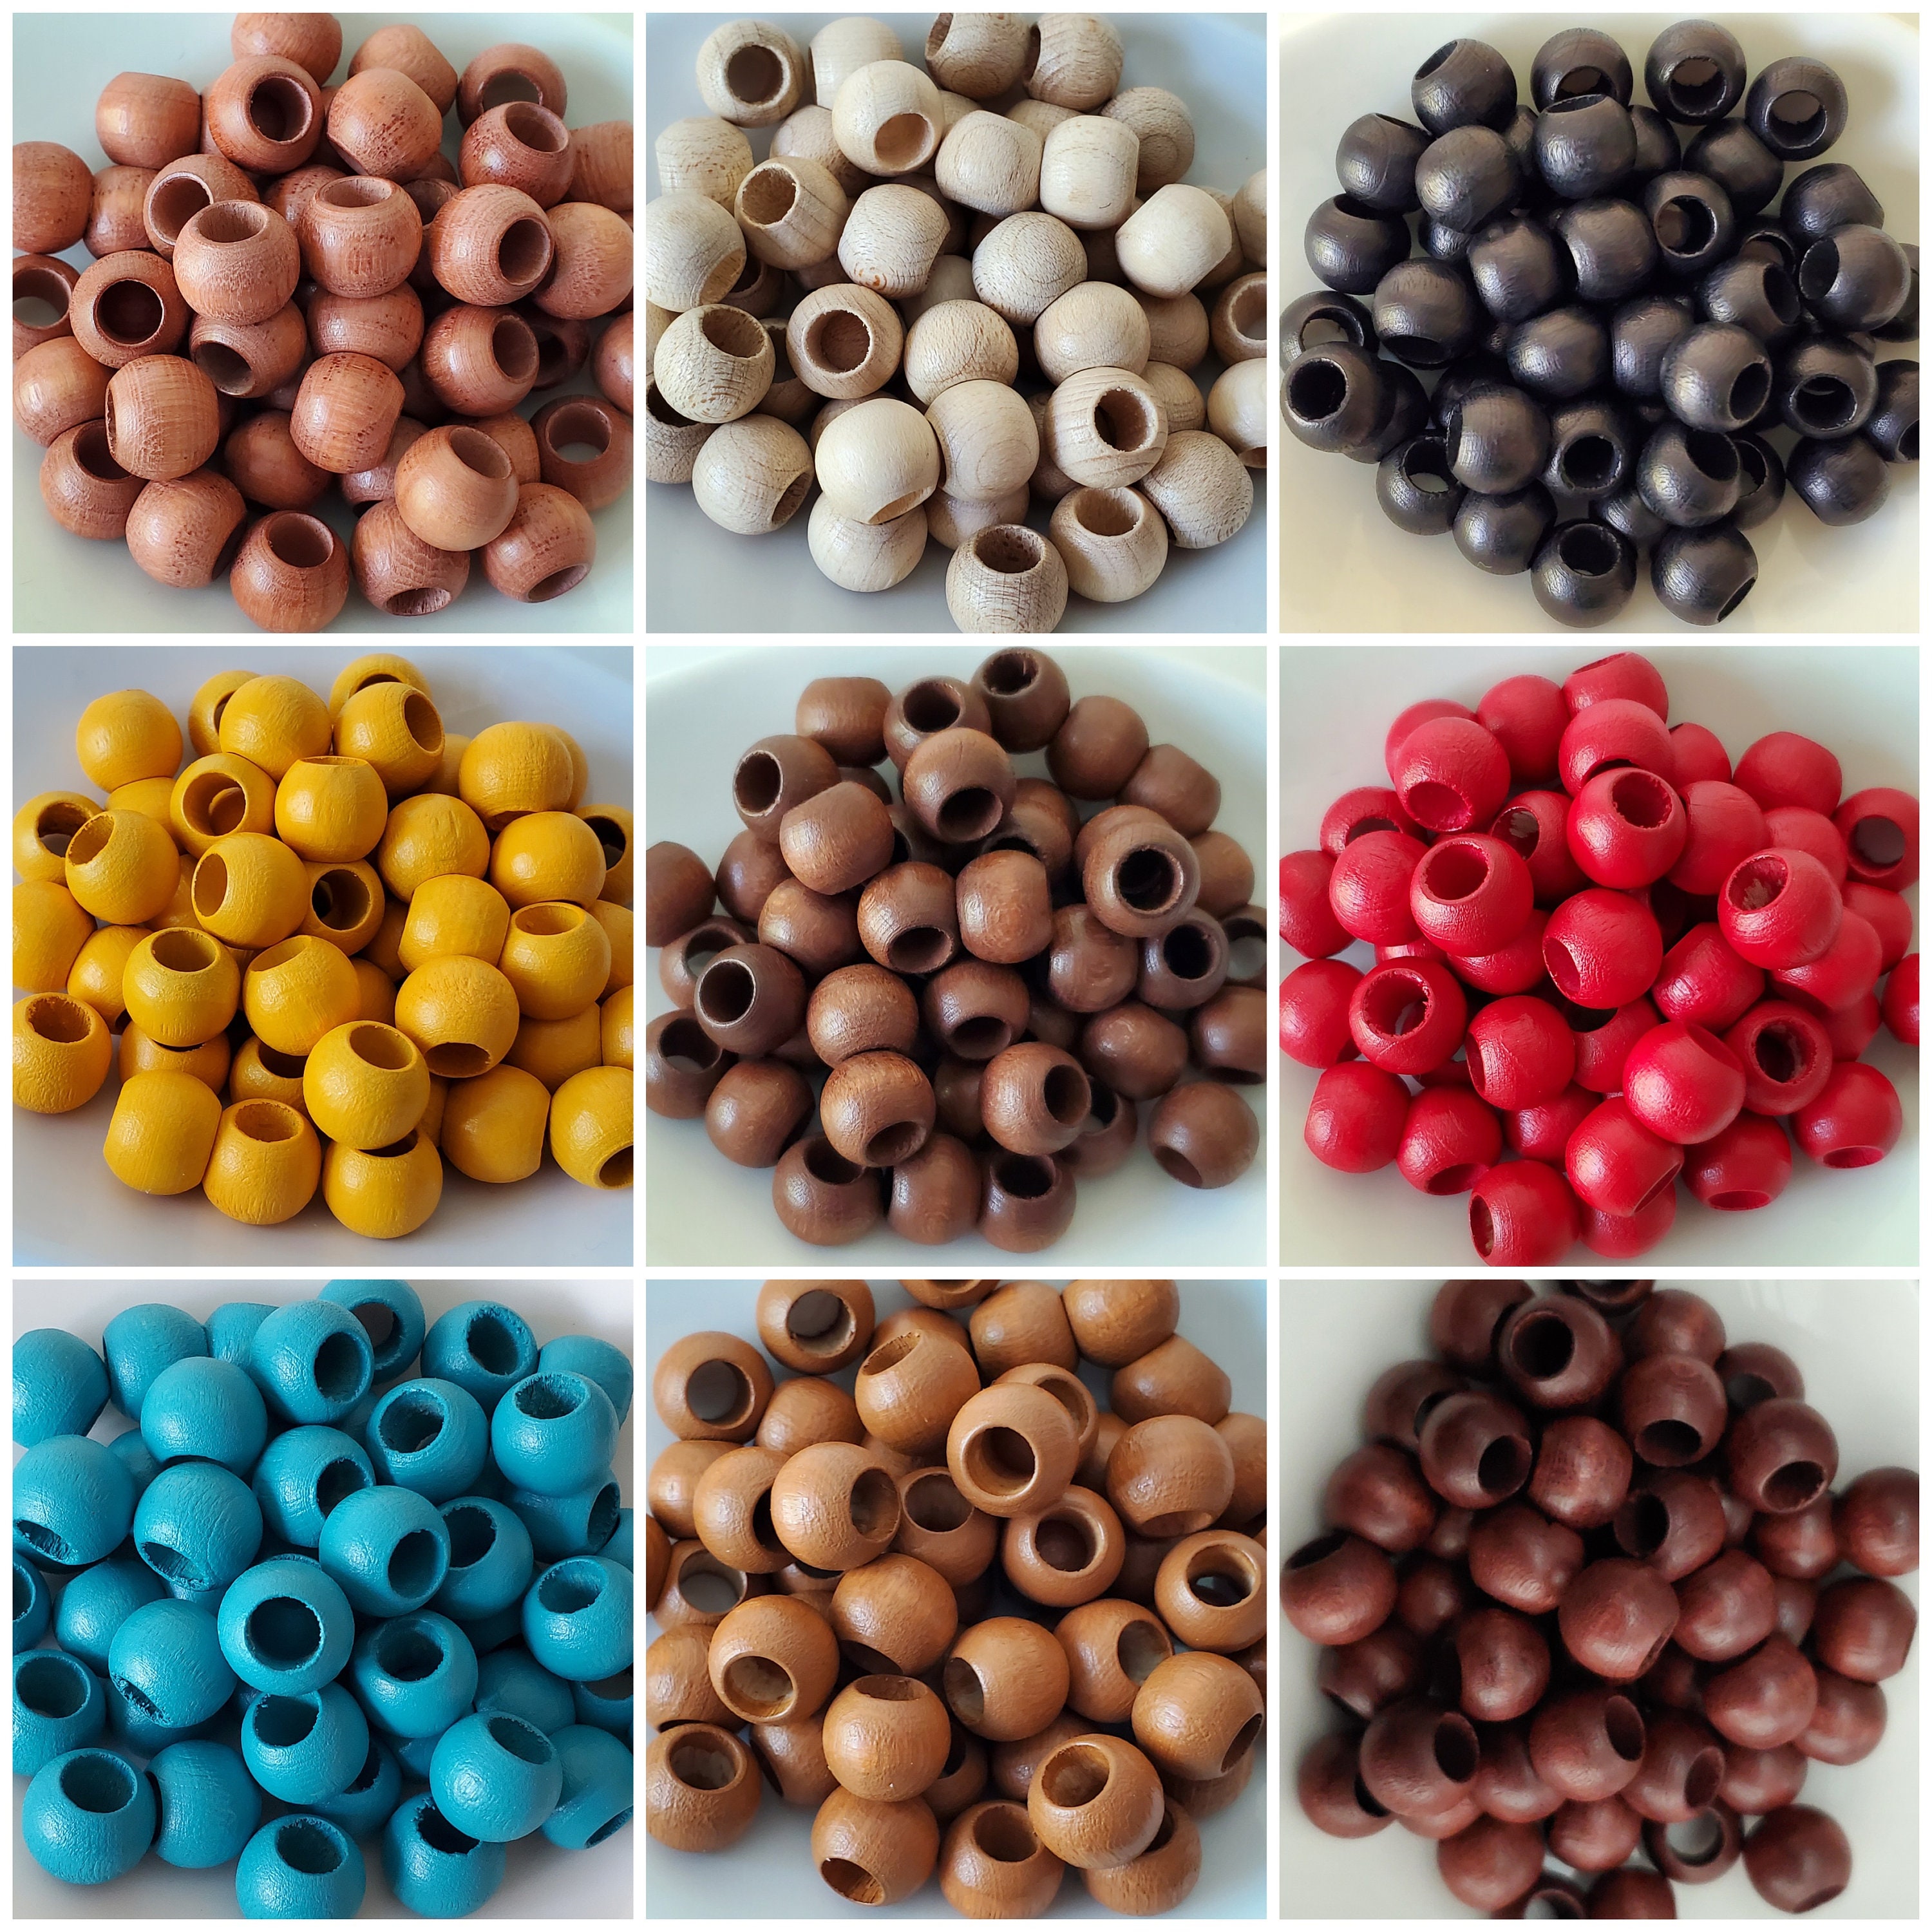 HGYCPP Wood Beads For Crafts With Holes Holiday Hemp Rope For Crafts Round  Wood Beads For Jewelry Making Home Party Decoration 